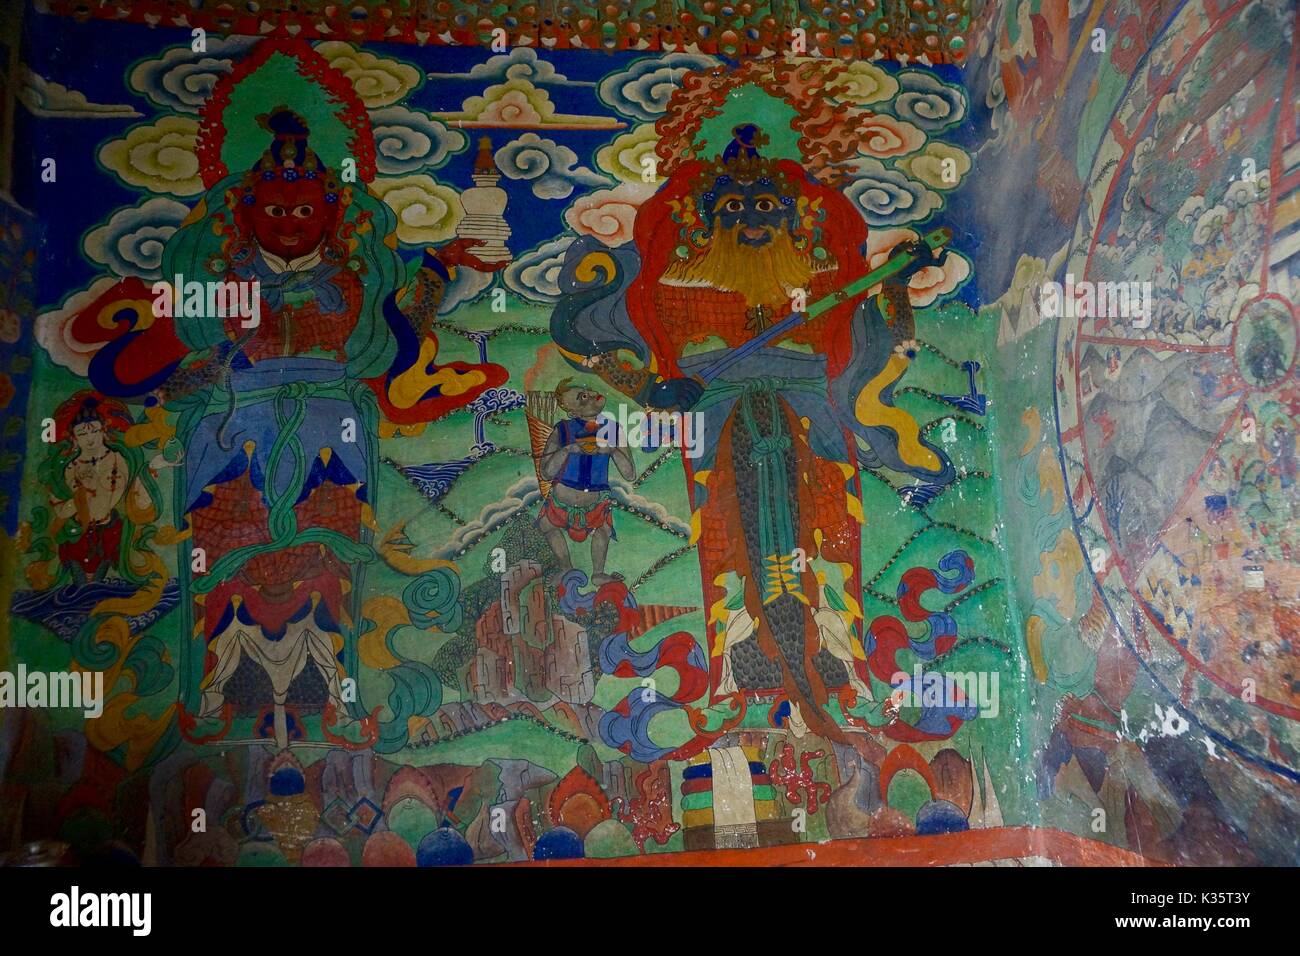 Buddhist wall paintings in Choede Gompa, Lo Manthang in Upper Mustang, Nepal Stock Photo